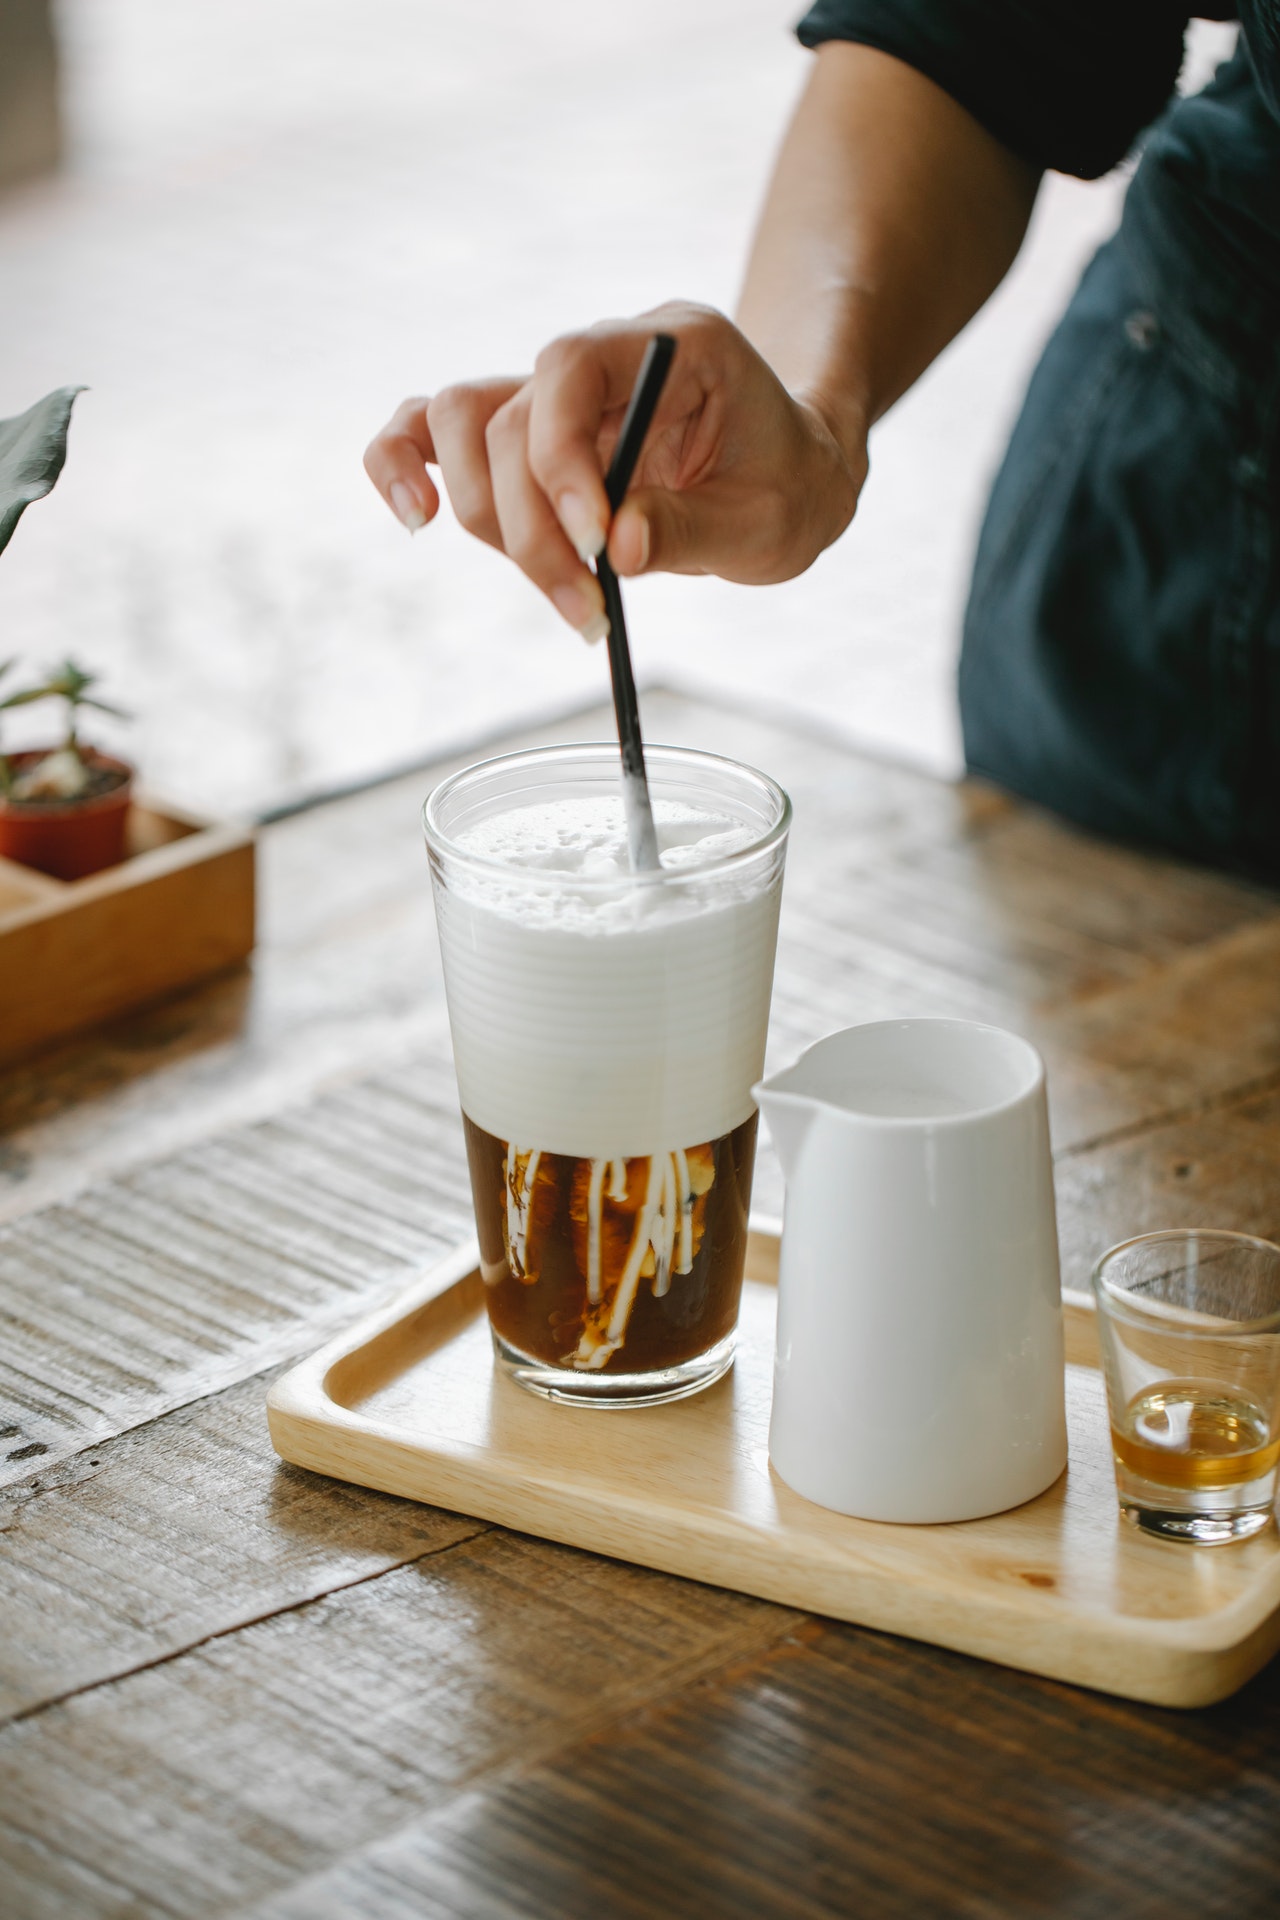 A tray with a glass of cold brew with milk in it, a milk decanter, and an empty shot glass.